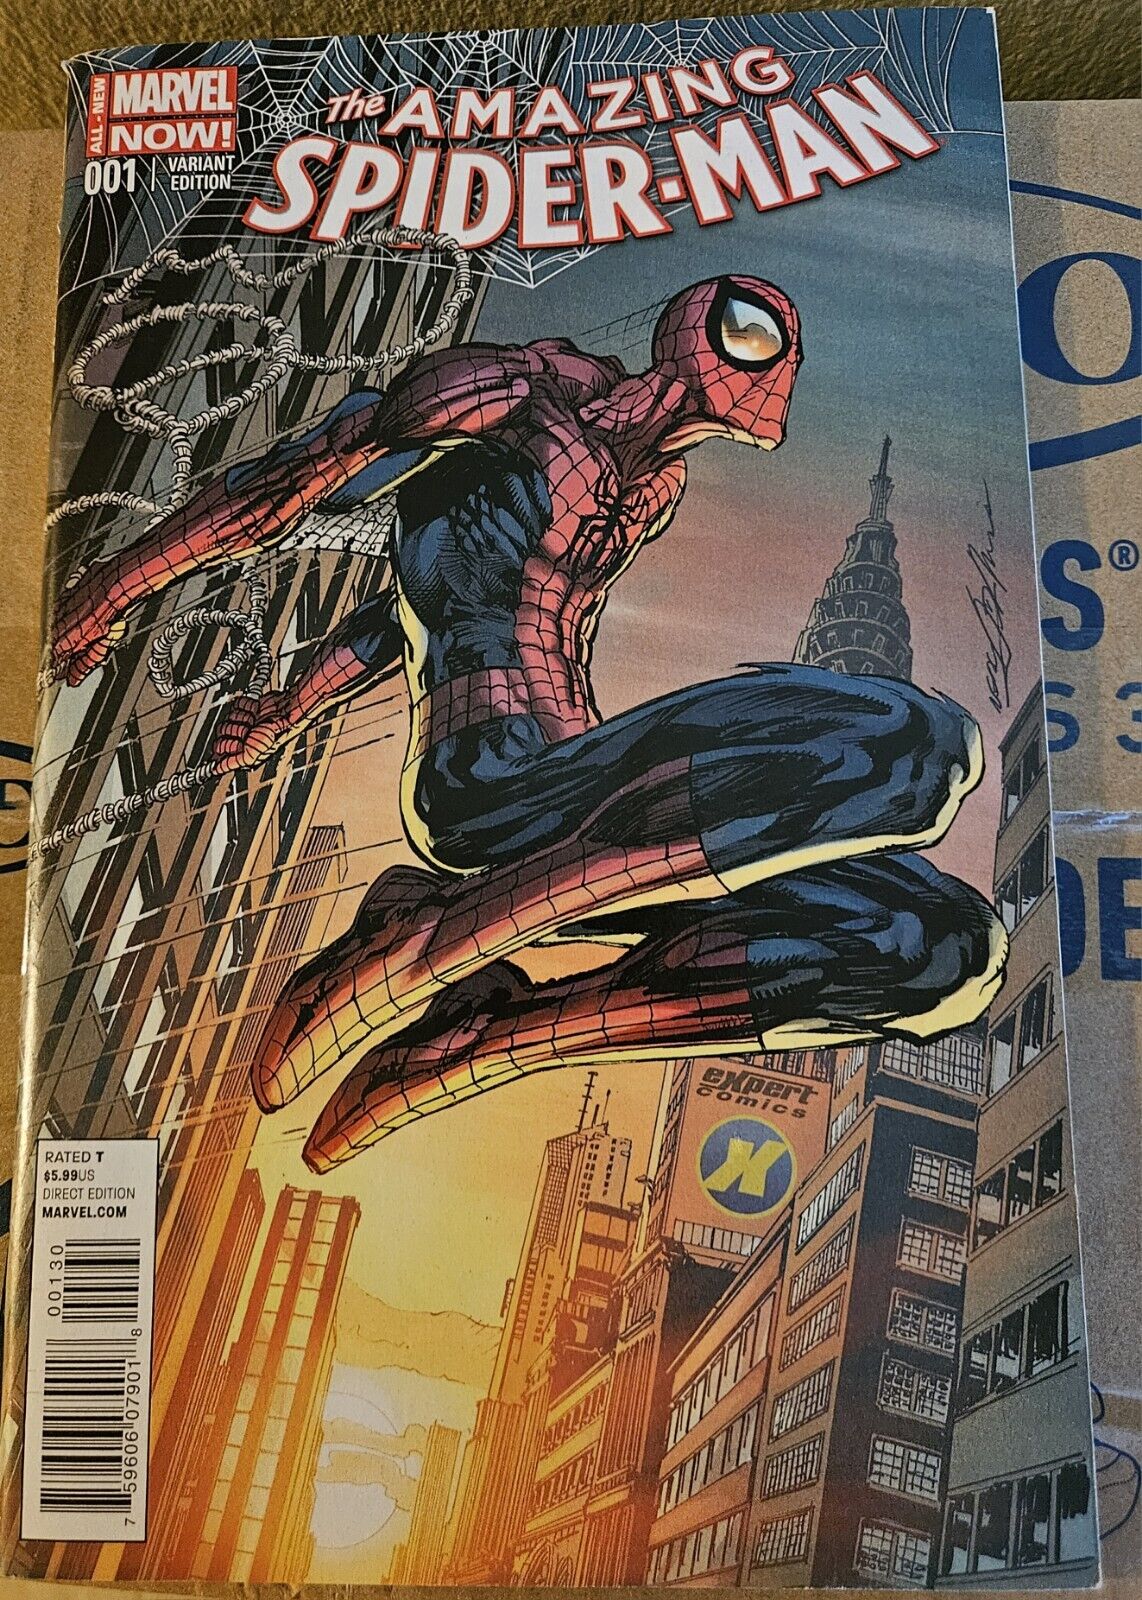 THE AMAZING SPIDER-MAN #1 (Vol.3)  NEAL ADAMS VARIANT COVER - KEY ISSUE 2014 New